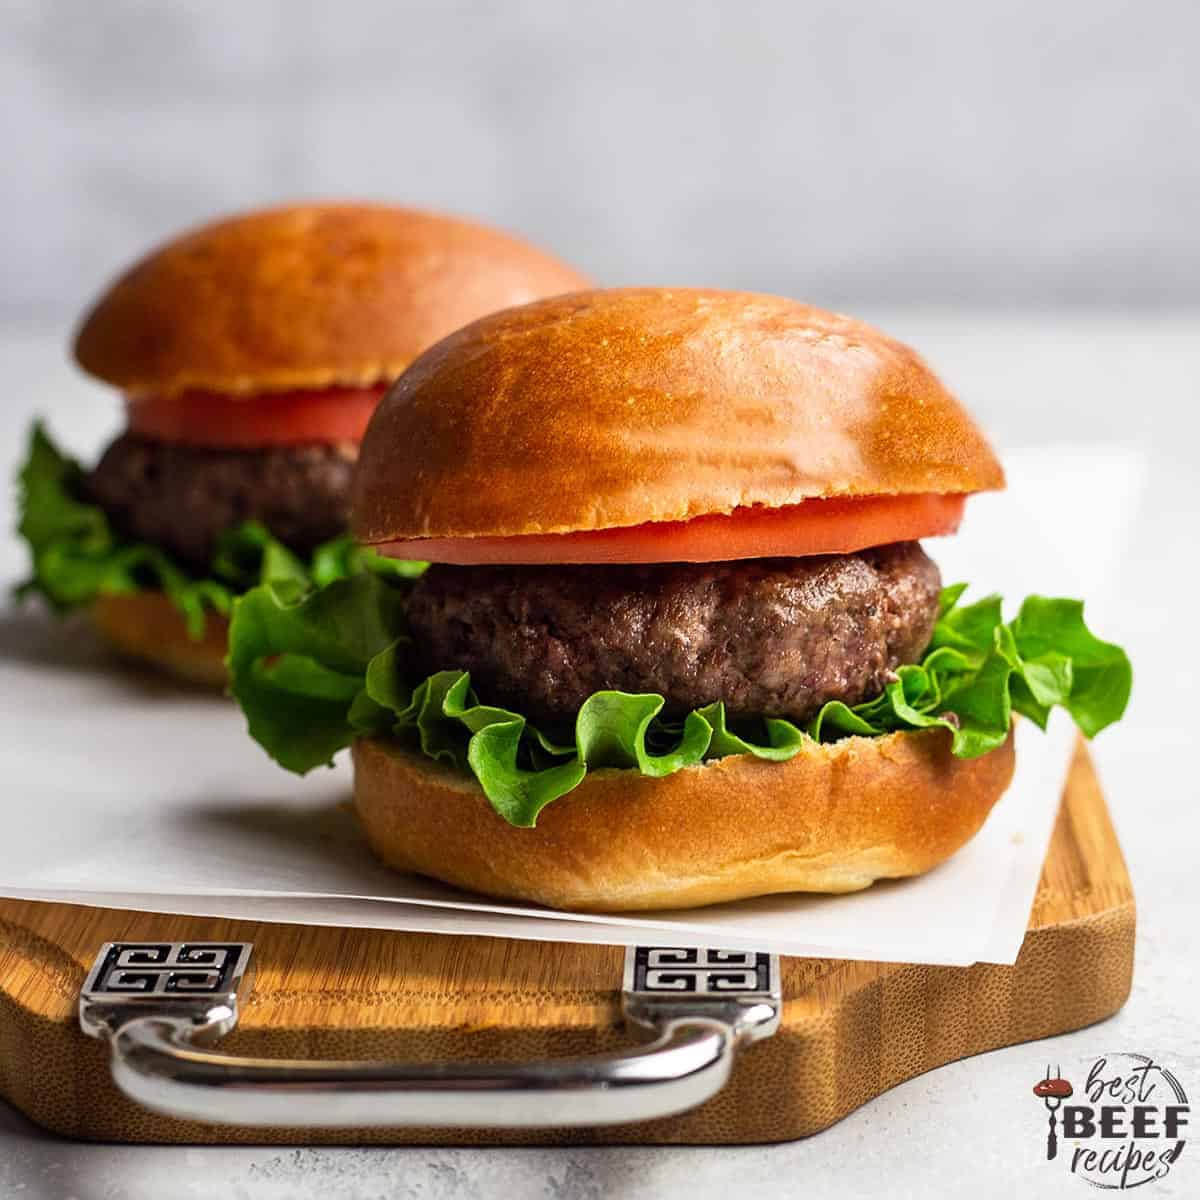 Two burgers made using air fryer burger recipe on golden-brown buns with lettuce and tomato on a piece of parchment paper on a wooden serving board